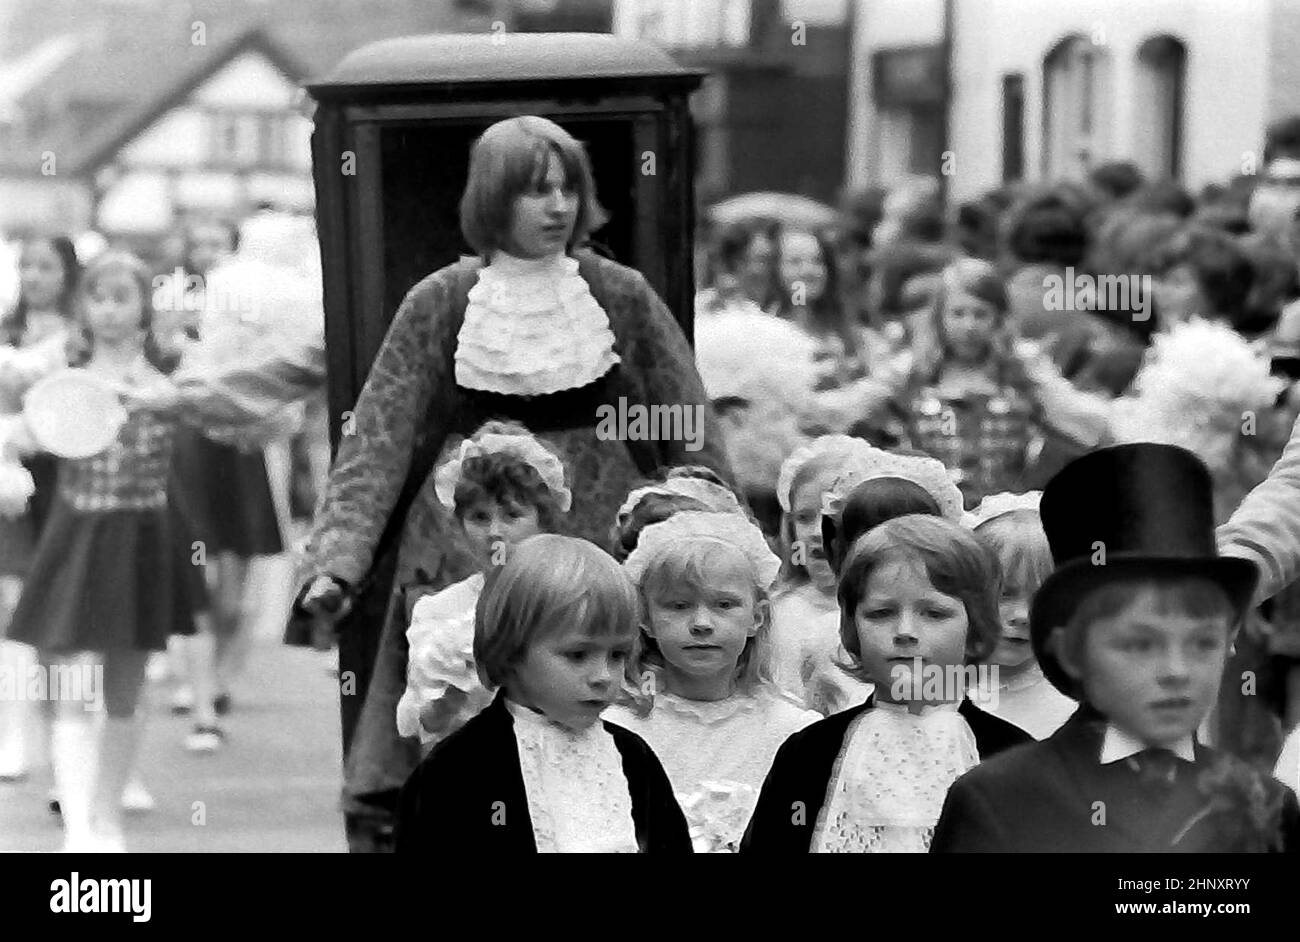 The annual Knutsford Royal May Day procession in 1976 in Knutsford, Cheshire, England, United Kingdom. It traditionally includes a fancy-dress pageant of children in historical or legendary costumes with  horse-drawn carriages. Here young children in historical costumes walk in the procession ahead of a teenage boy carrying the front handles of a litter or sedan chair. Stock Photo